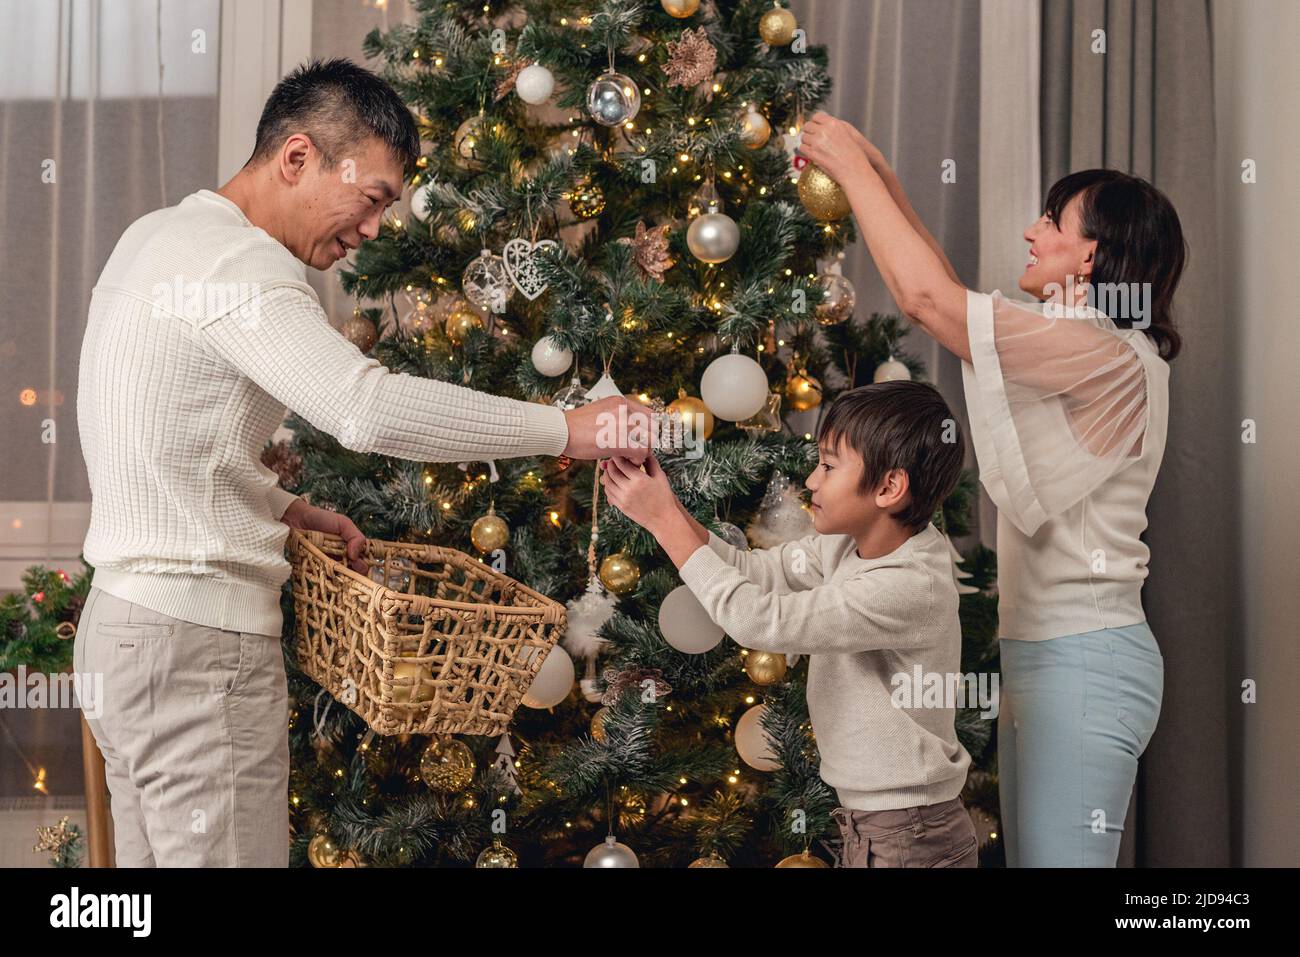 Happy family decorating christmas tree together Stock Photo